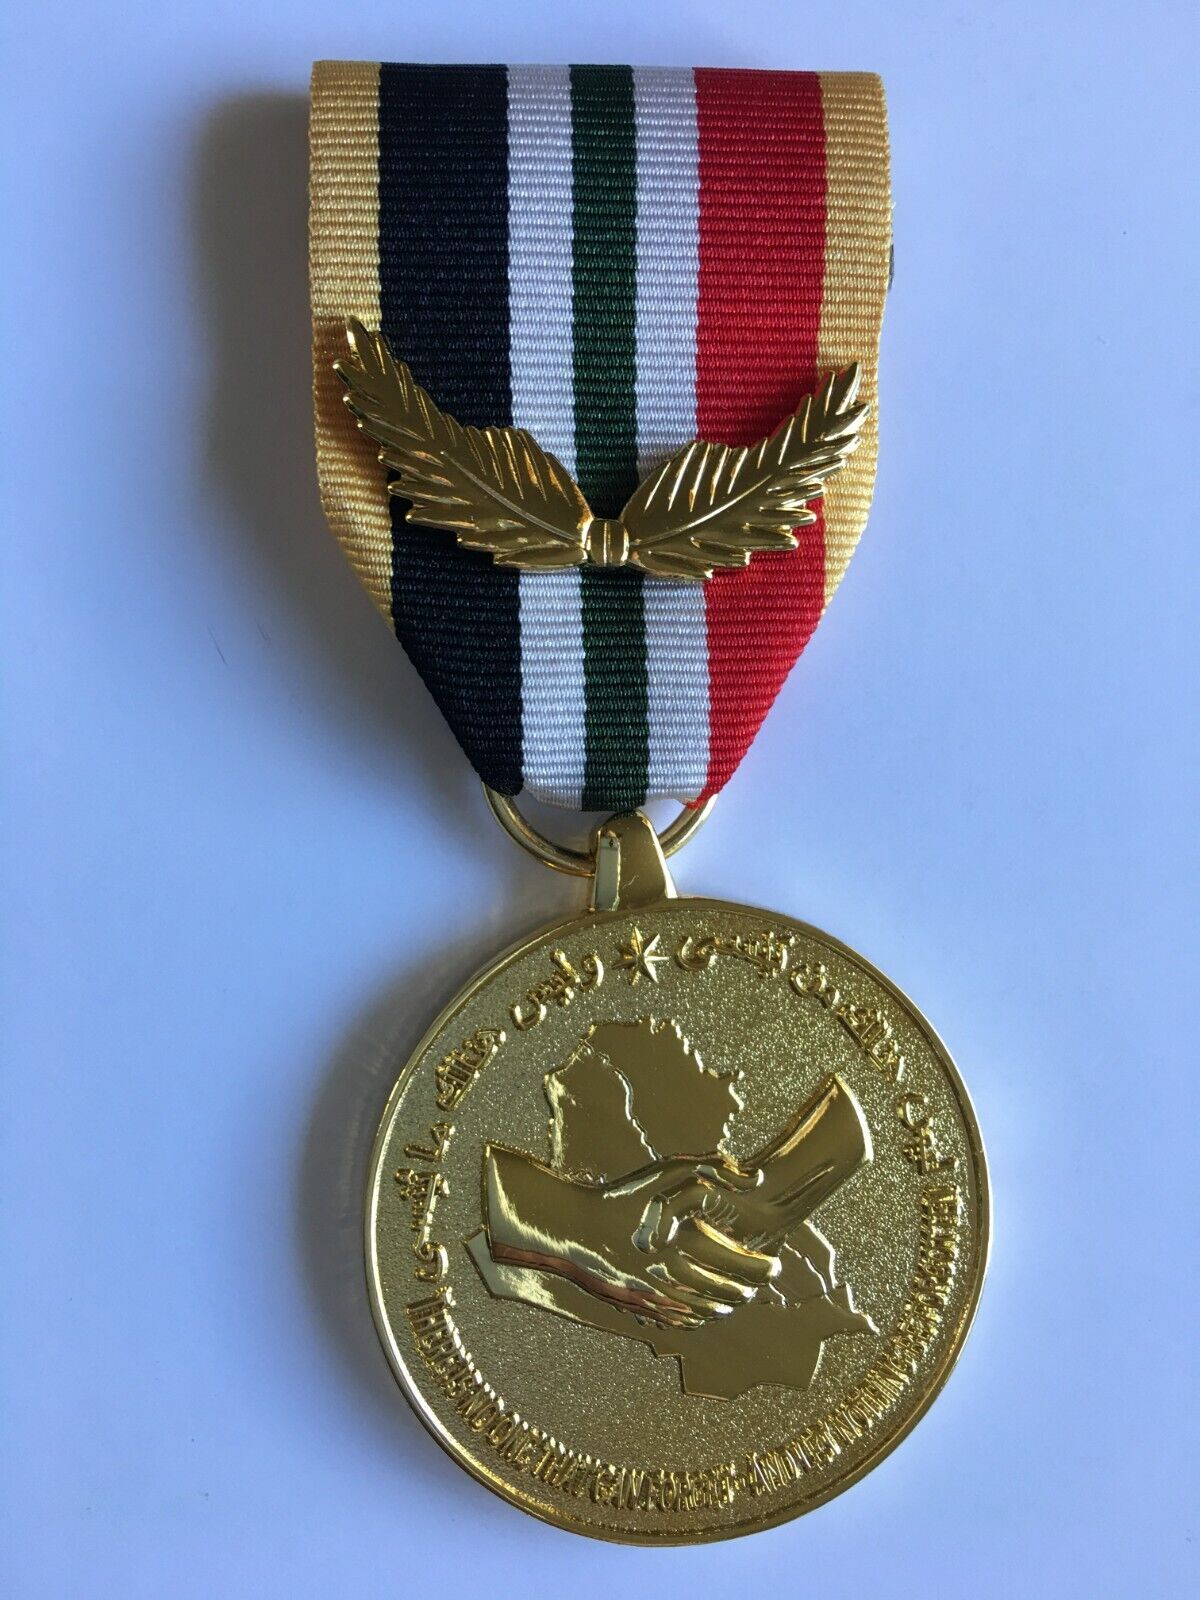 IRAQ COMMITMENT MEDAL (MILITARY VERSION)